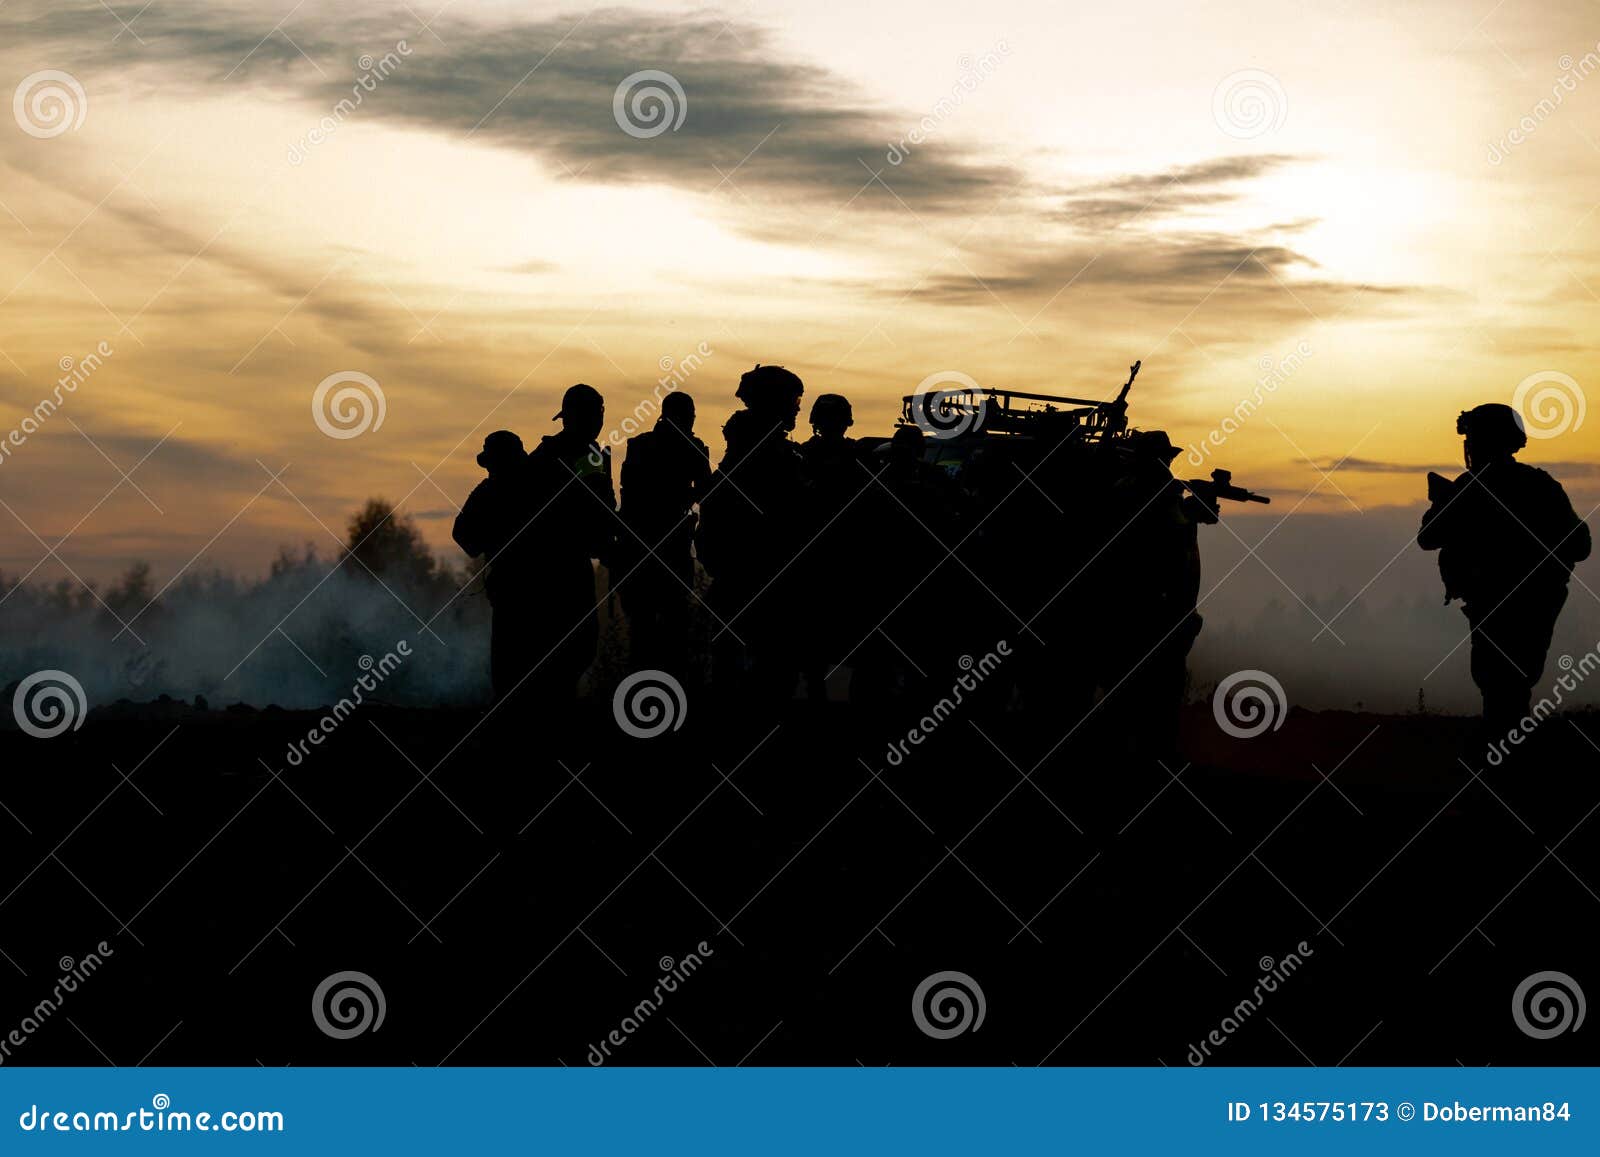 silhouette action soldiers walking hold weapons the background is smoke and sunset and white balance ship effect dark